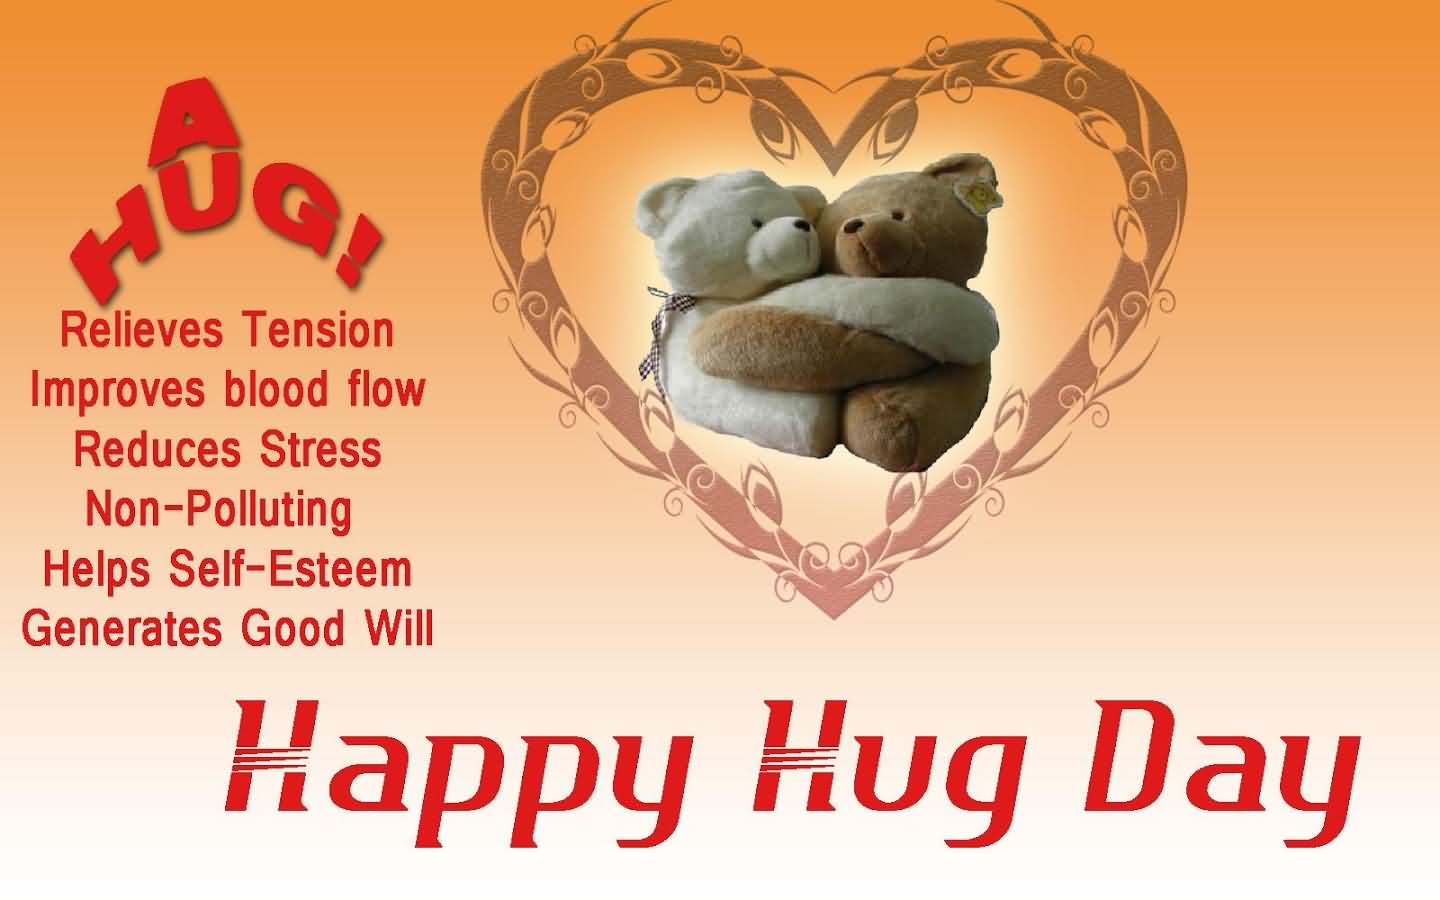 A Hug Relieves Tension Improves Blood Flow Happy Hug Day